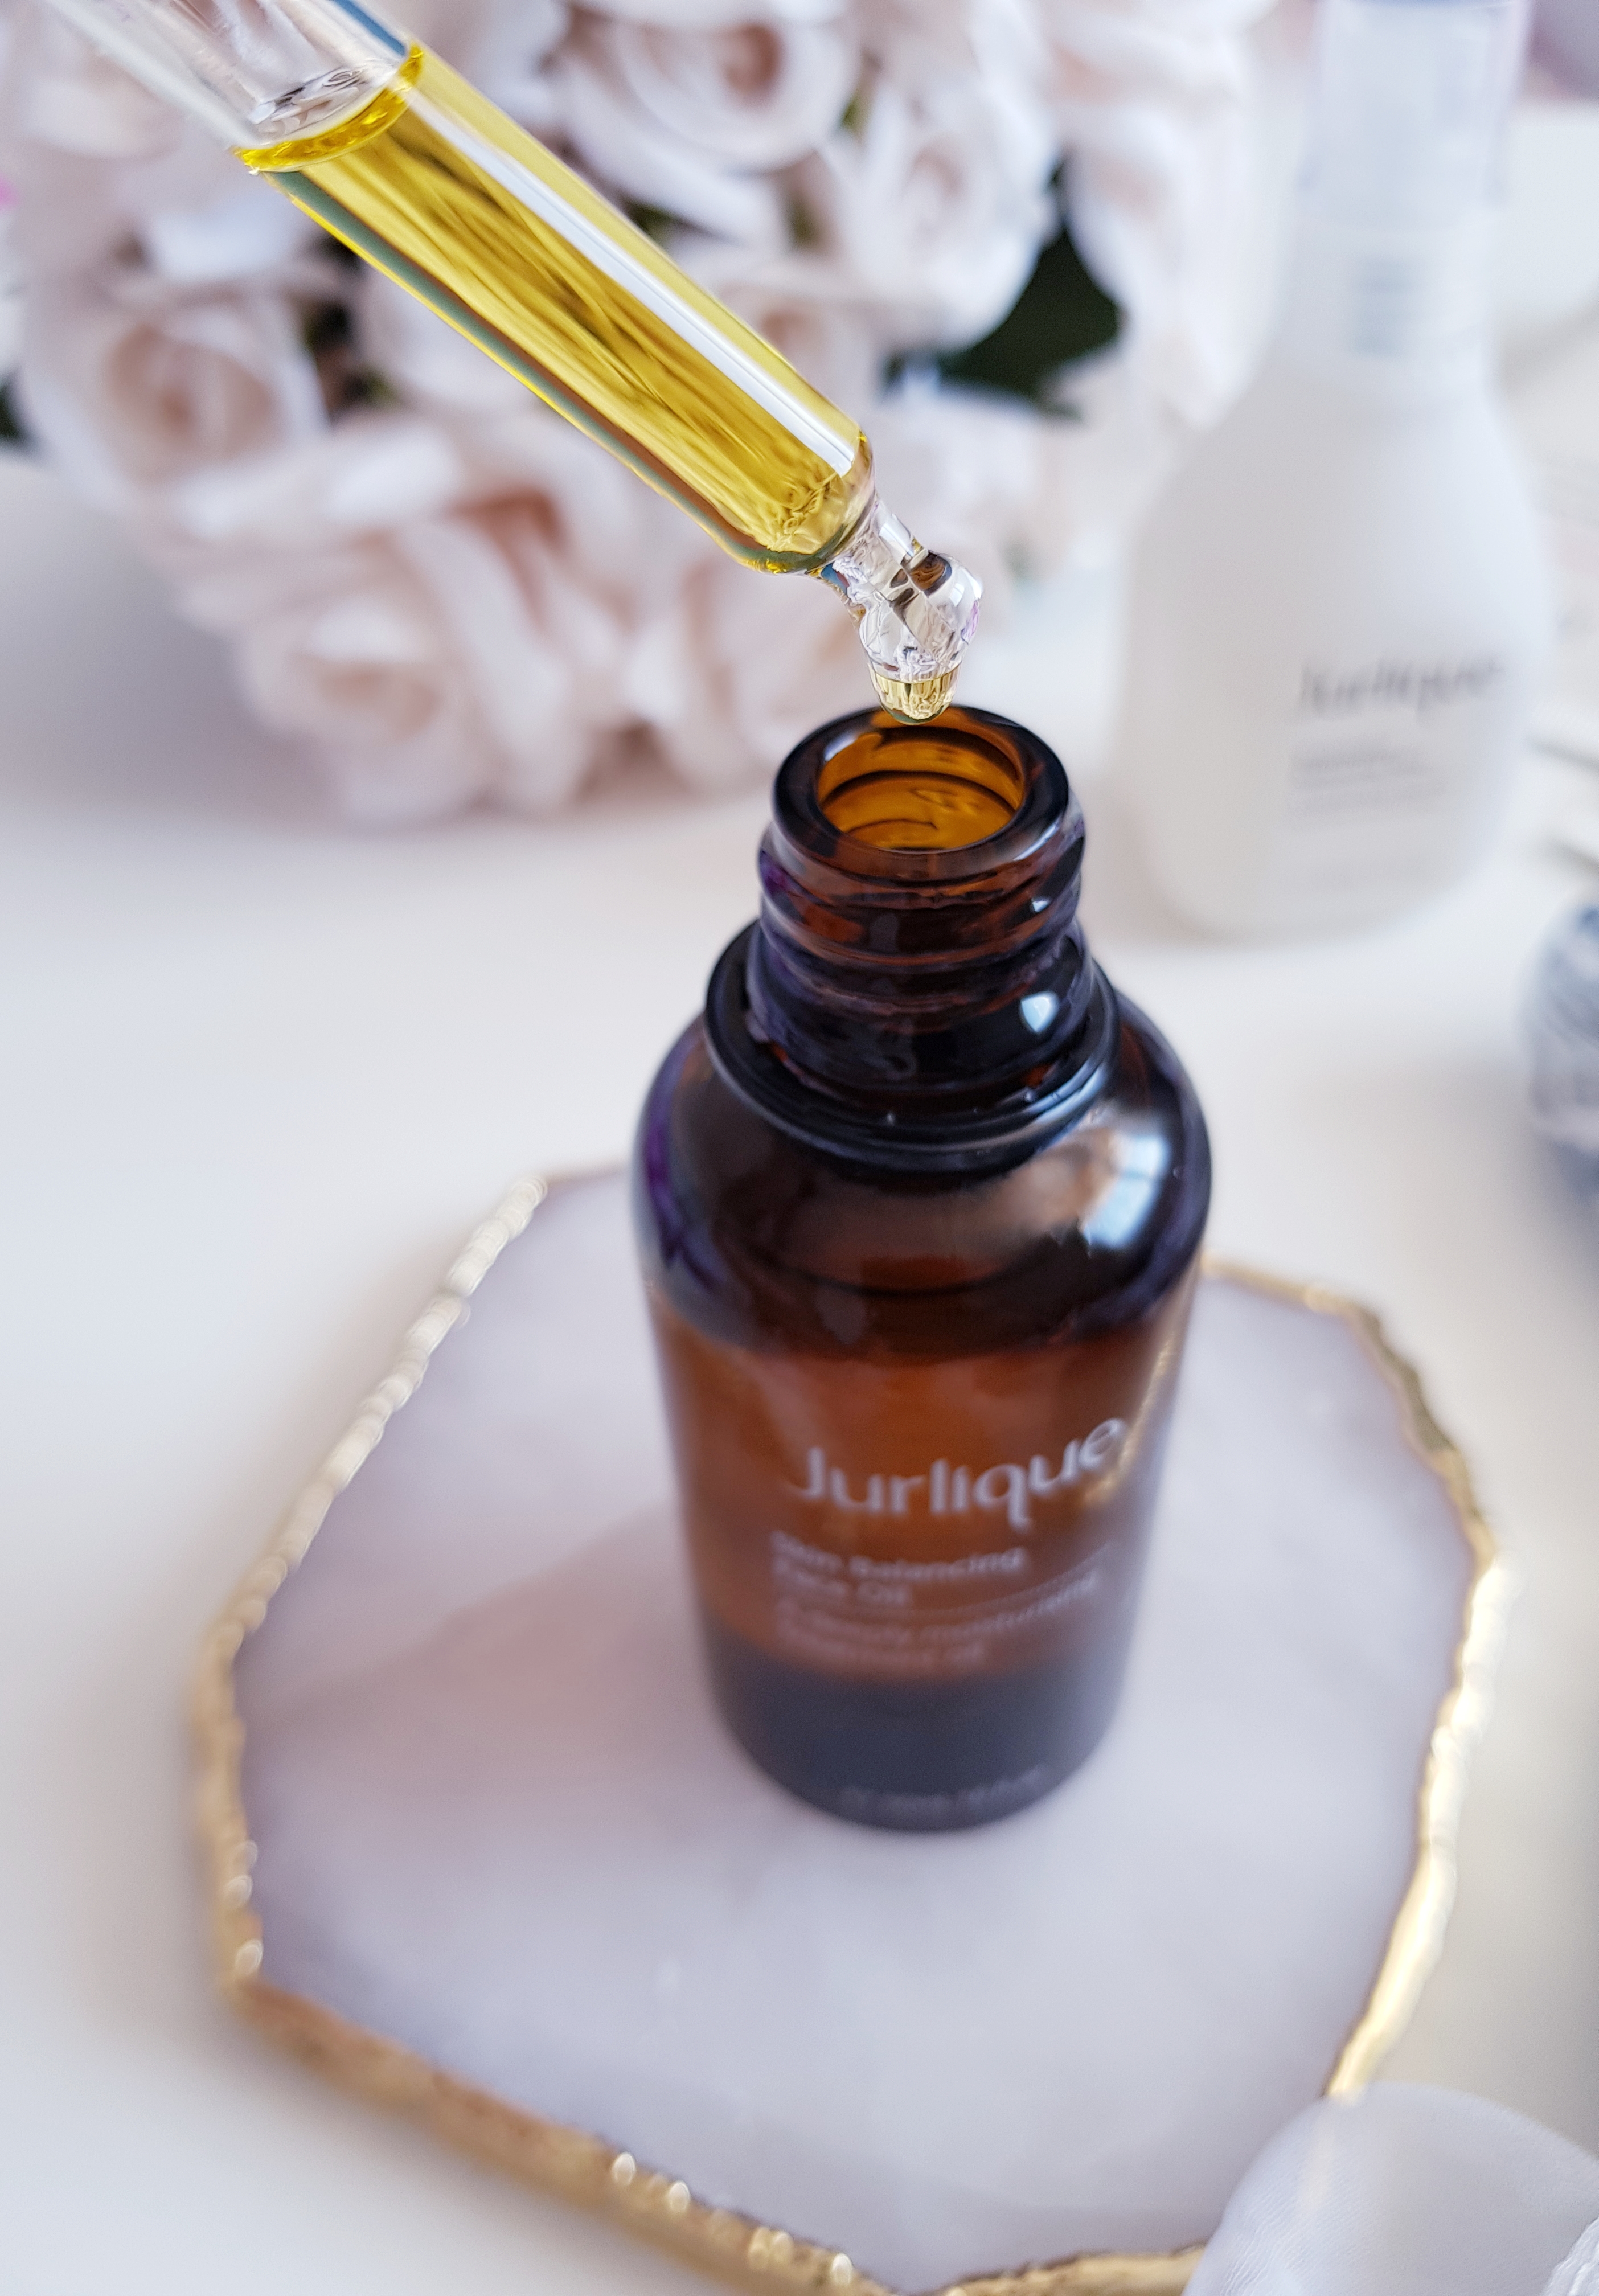 Jurlique Skin Balancing Oil - Treatment for dry and dehydrated skin - Ms Tantrum Blog